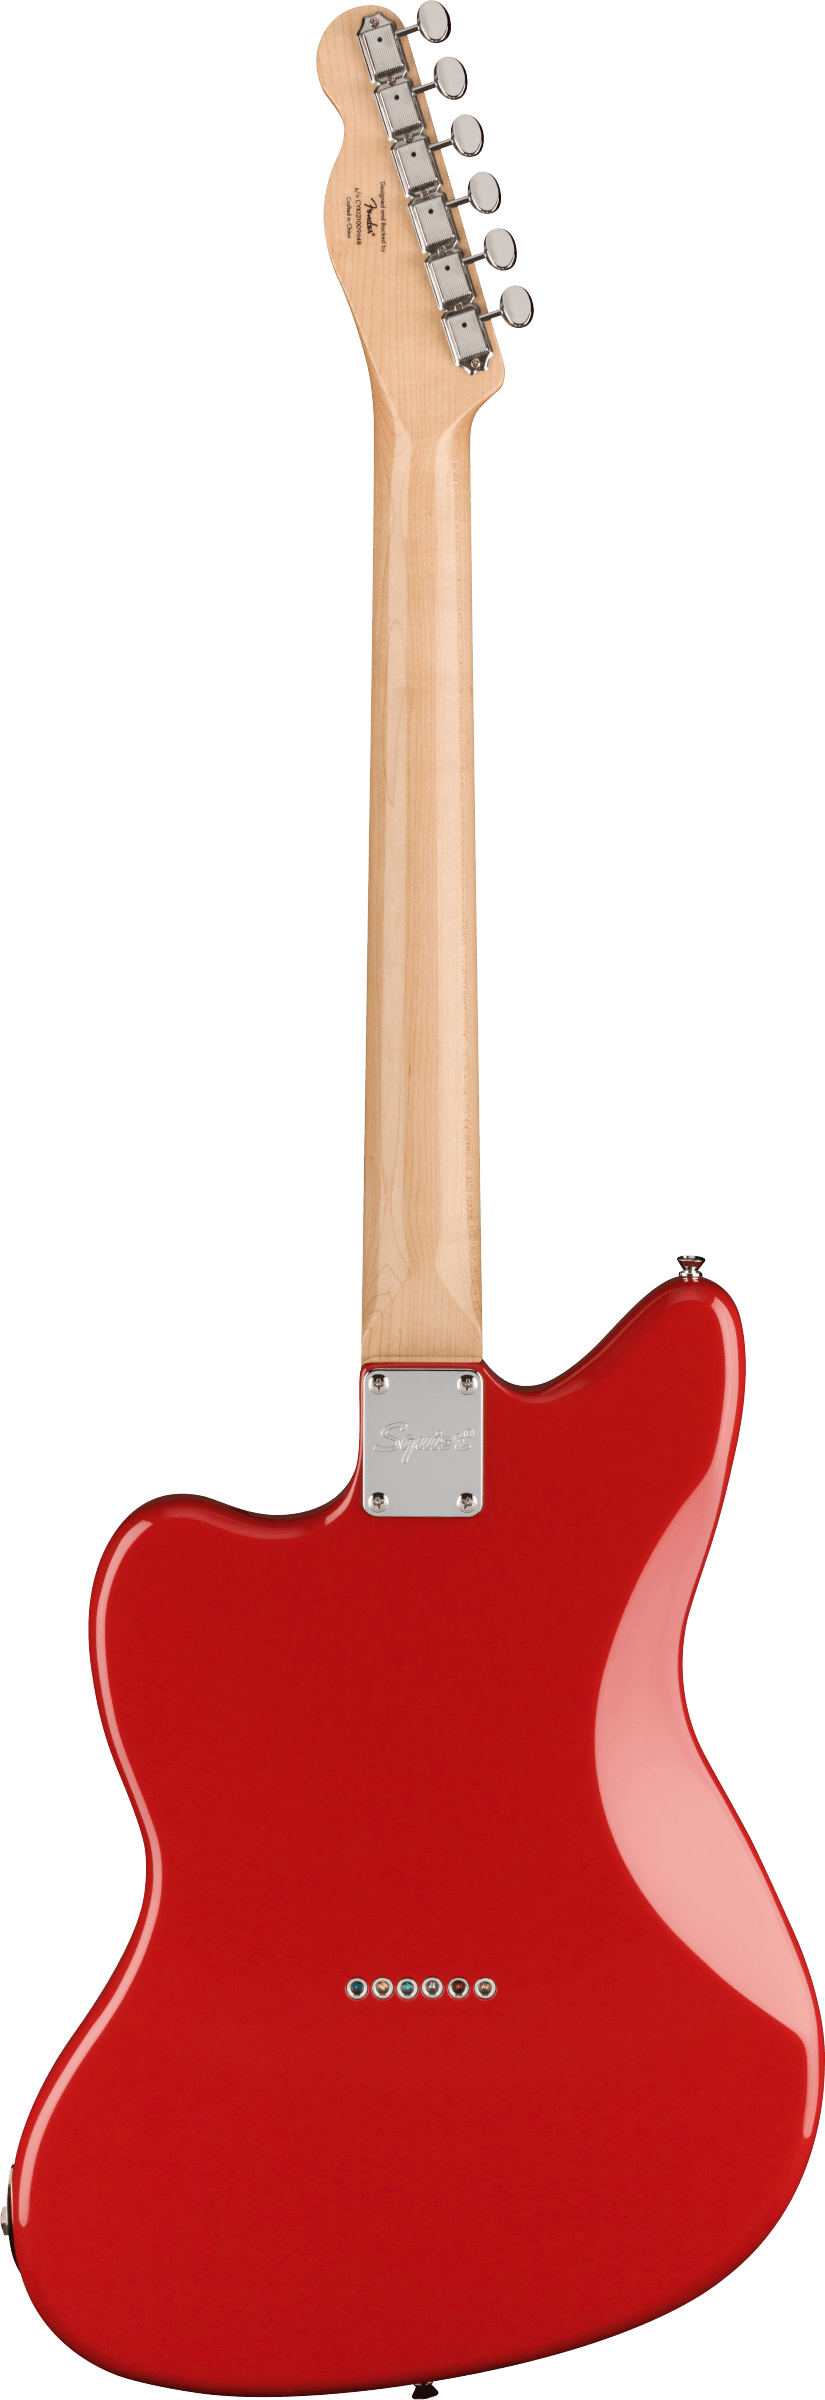 Squier FSR Paranormal Offset Telecaster SH RW Fingerboard in